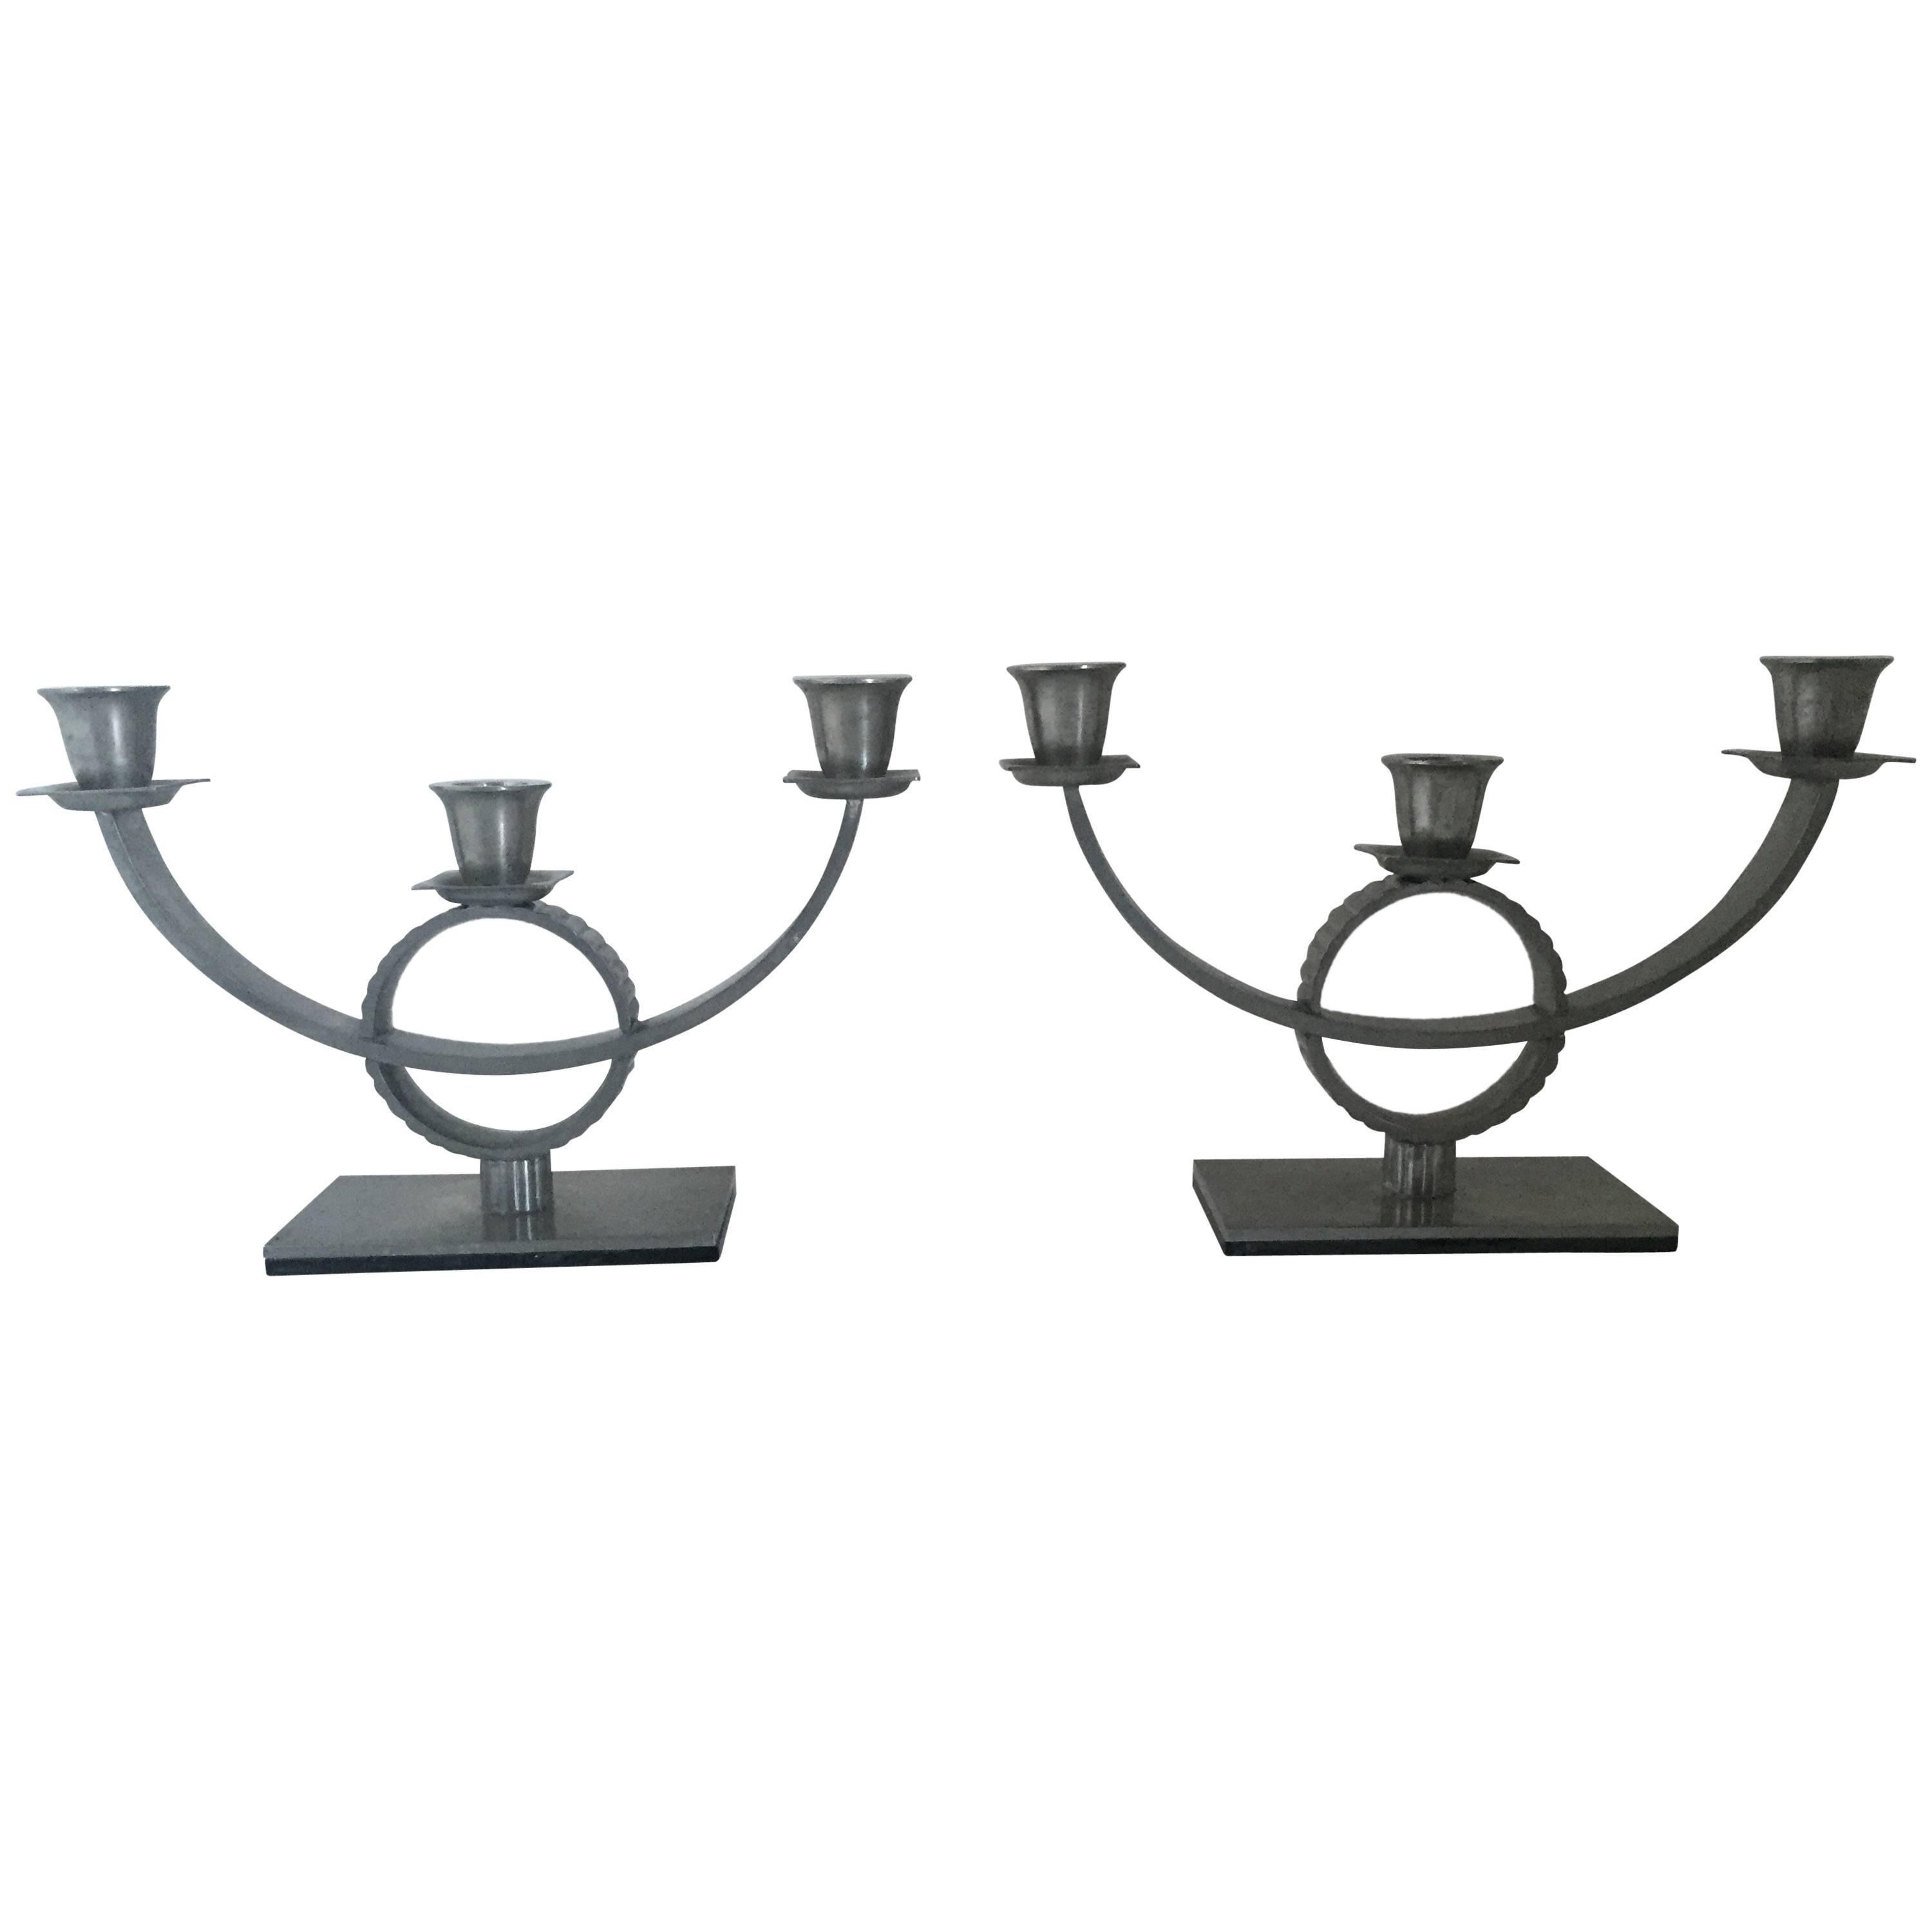 1930 Swedish Grace Pair of Art Deco Pewter Candelabra For Sale